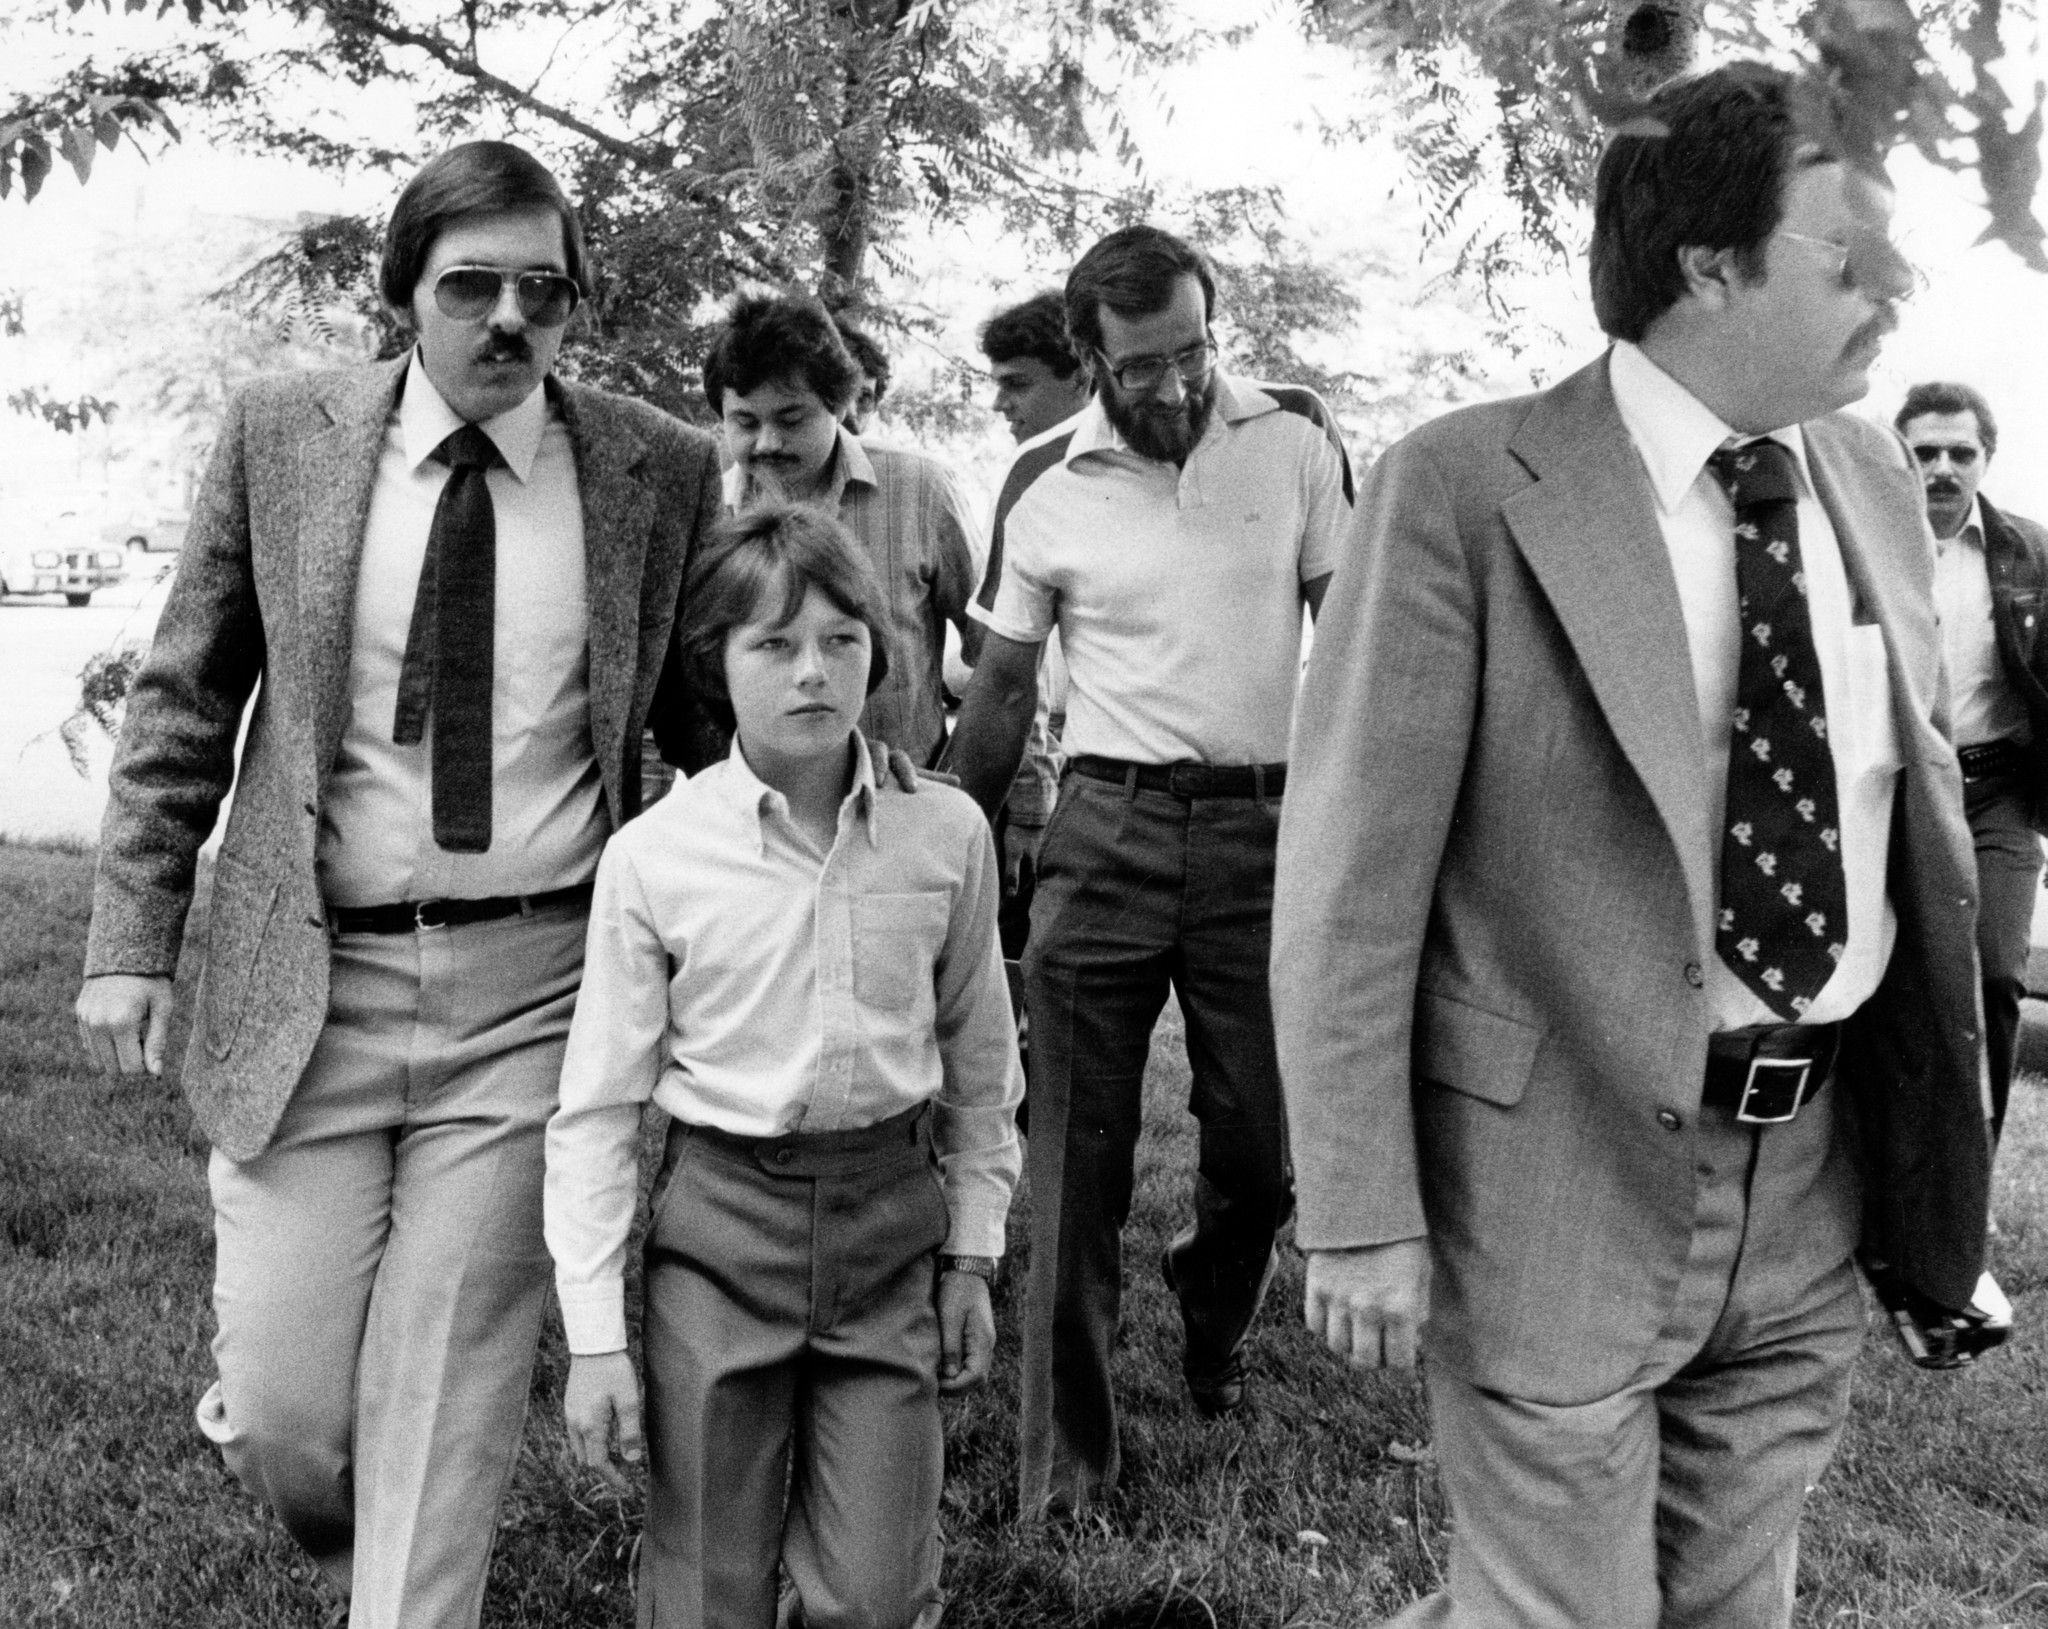 Walter Polovchak (center) walking into juvenile court for a trial about his custody on 4 August 1980